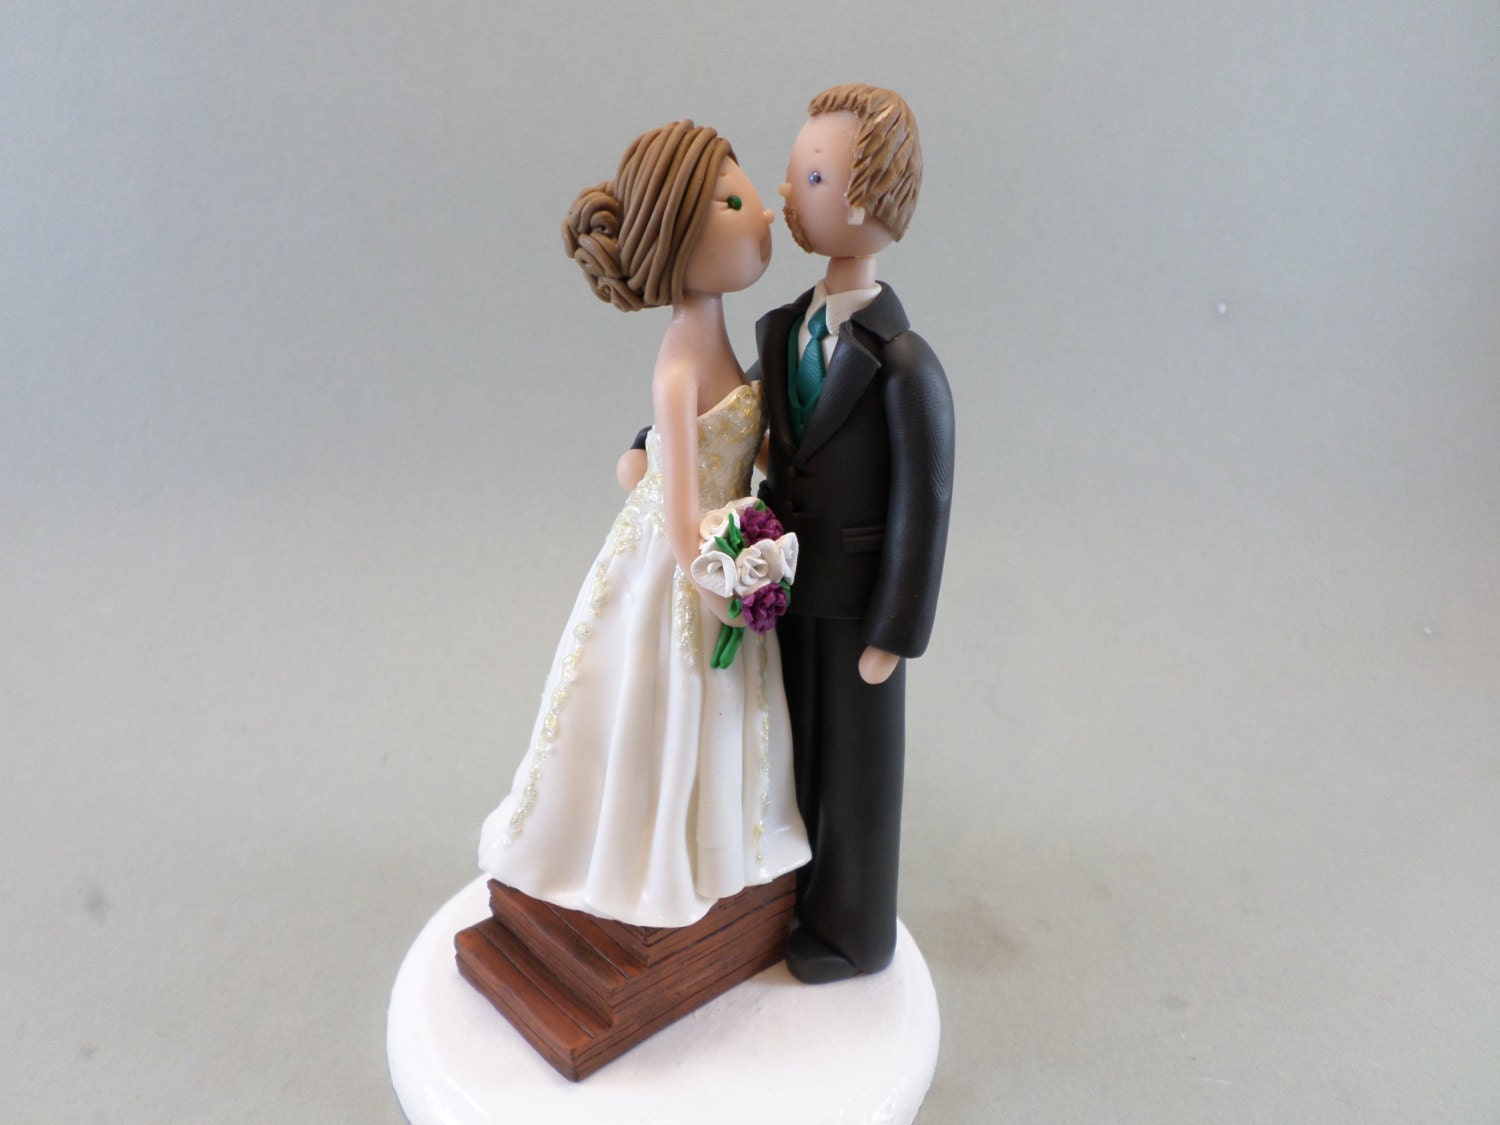 Short Bride & Tall Groom Personalized Wedding Cake Topper